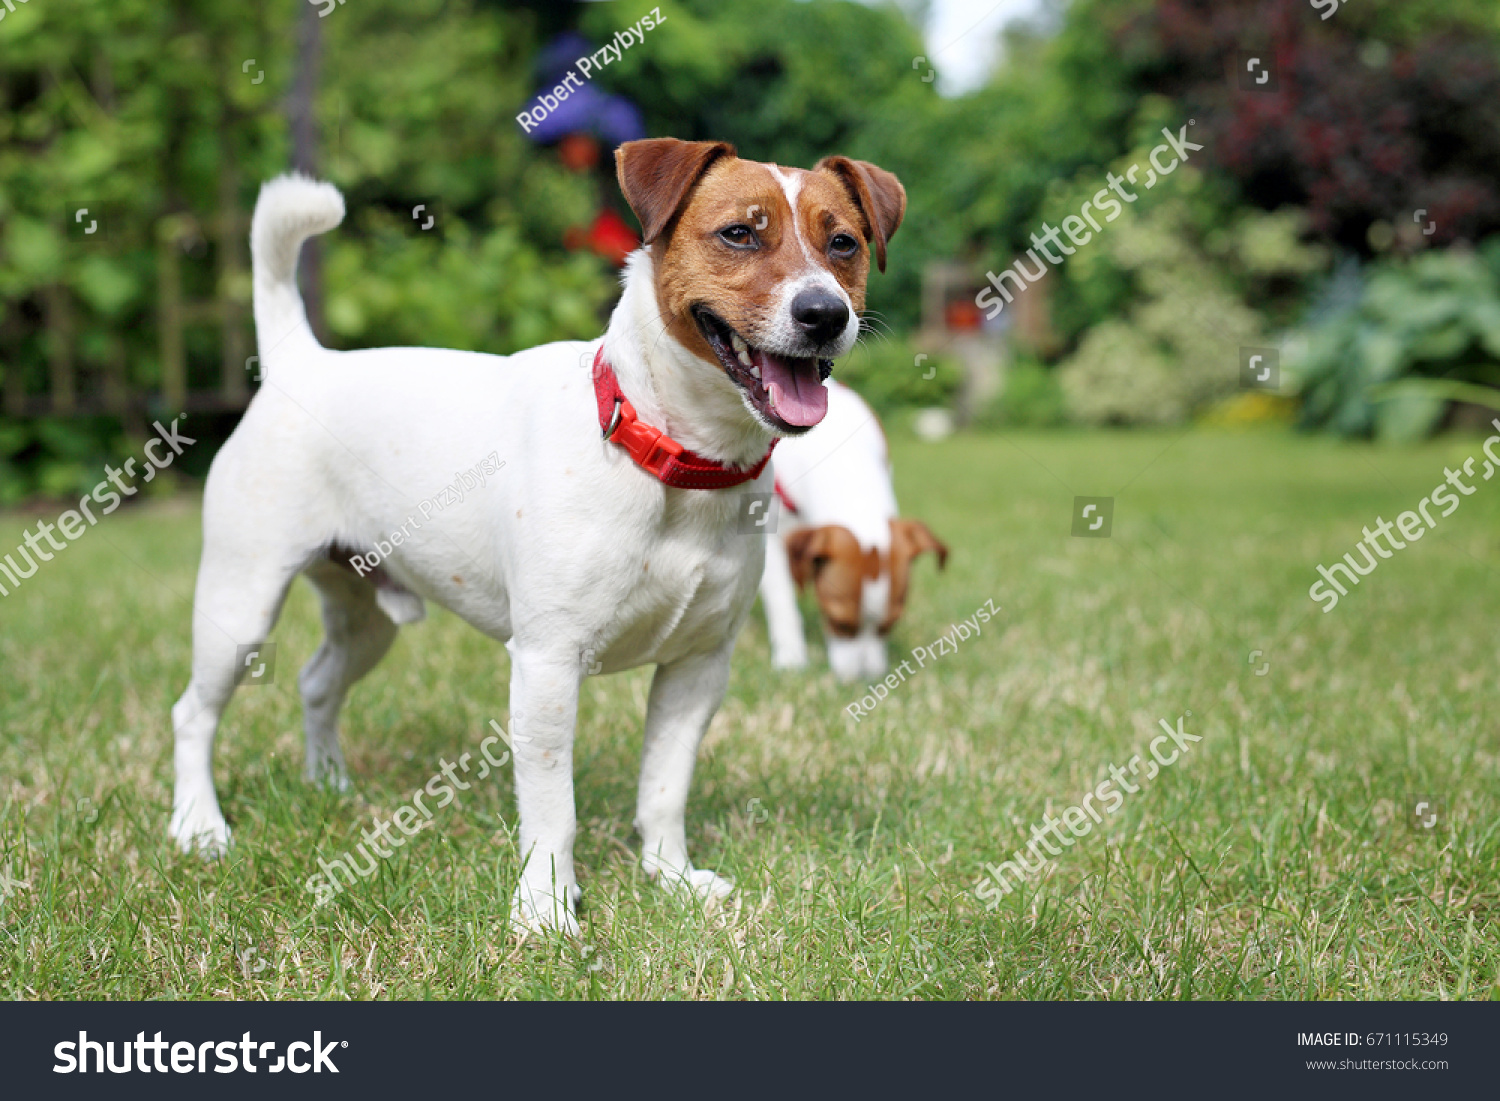 Adult Terrier Dog Stock Photo (Edit Now 